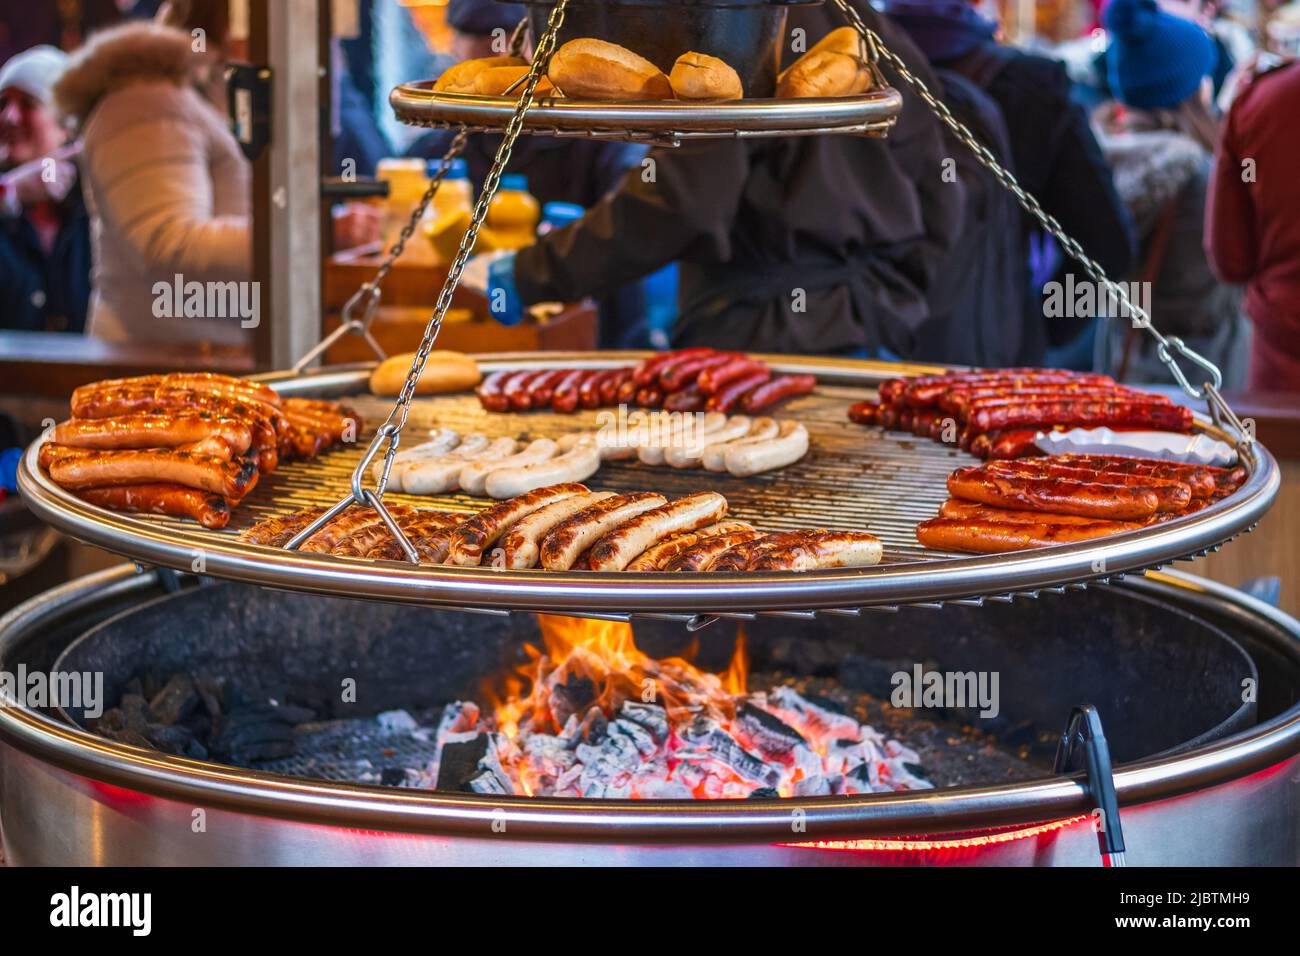 Grilling sausages on barbecue grill at a food stall of Christmas market Hyde Park Winter Wonderland in London Stock Photo